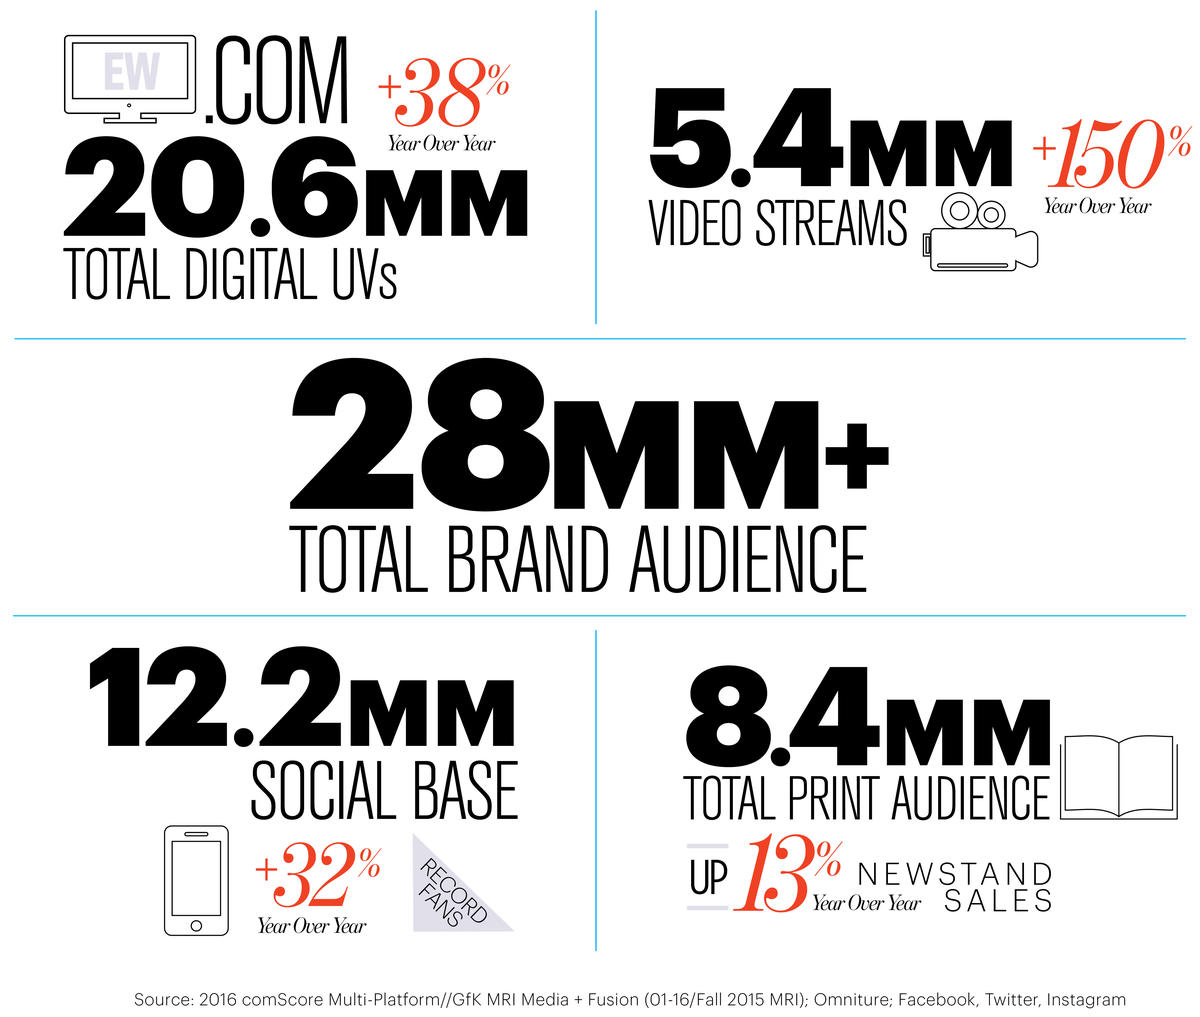 Stats about brand audience, social base, digital UV's and print audience